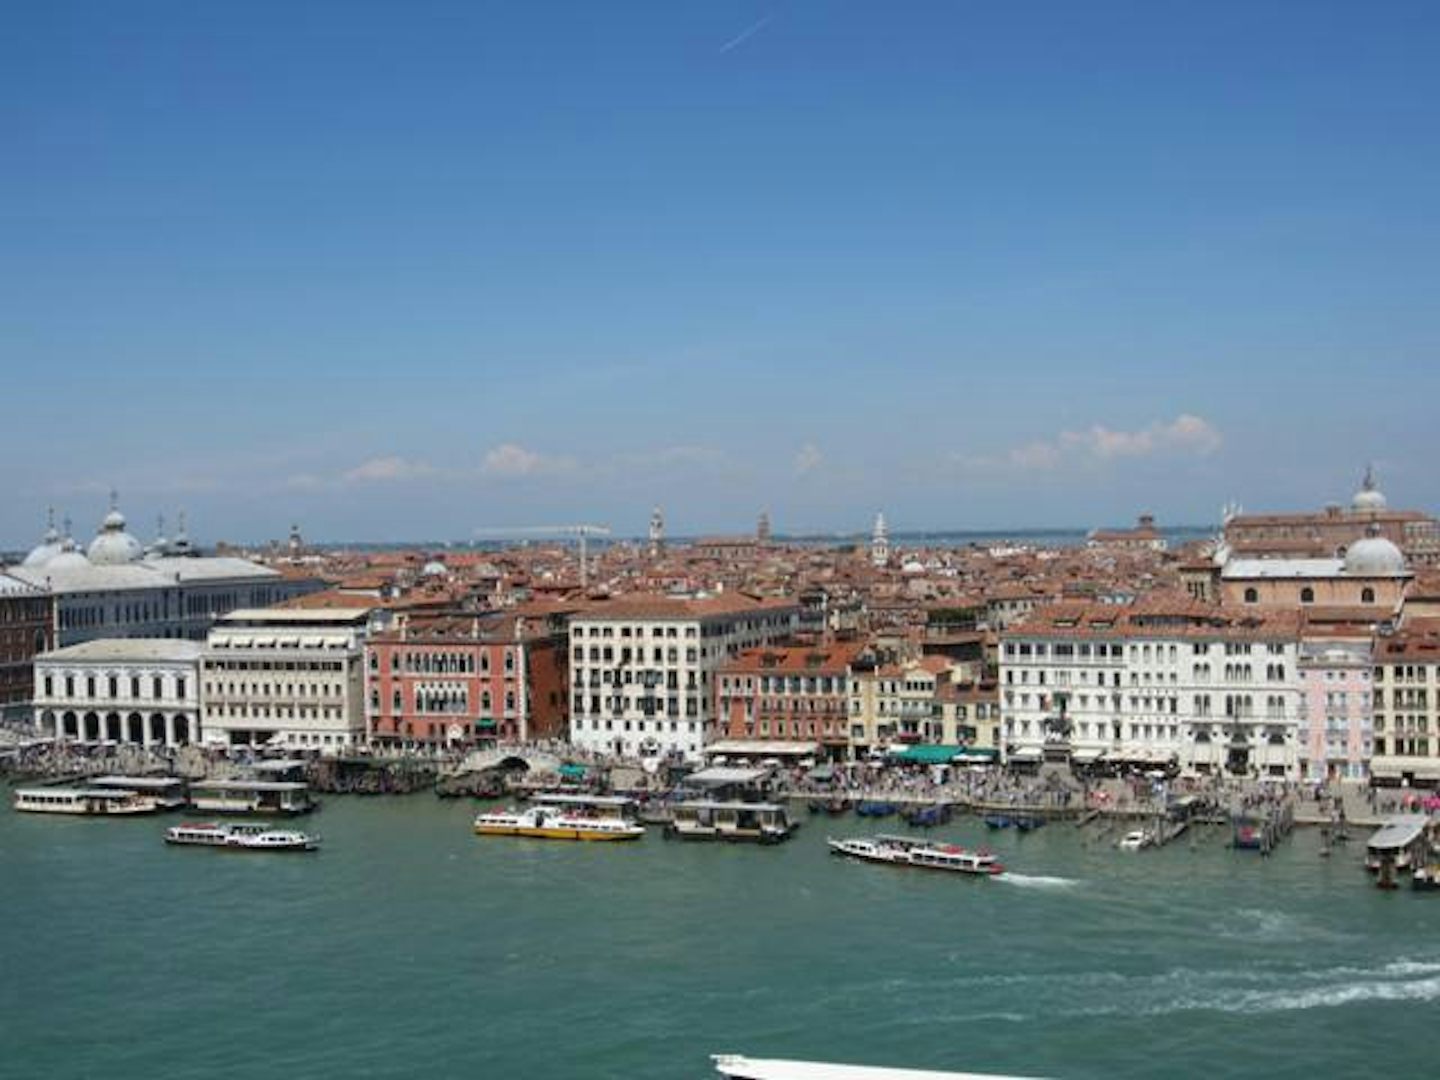 View of Venice from Cruise ship.